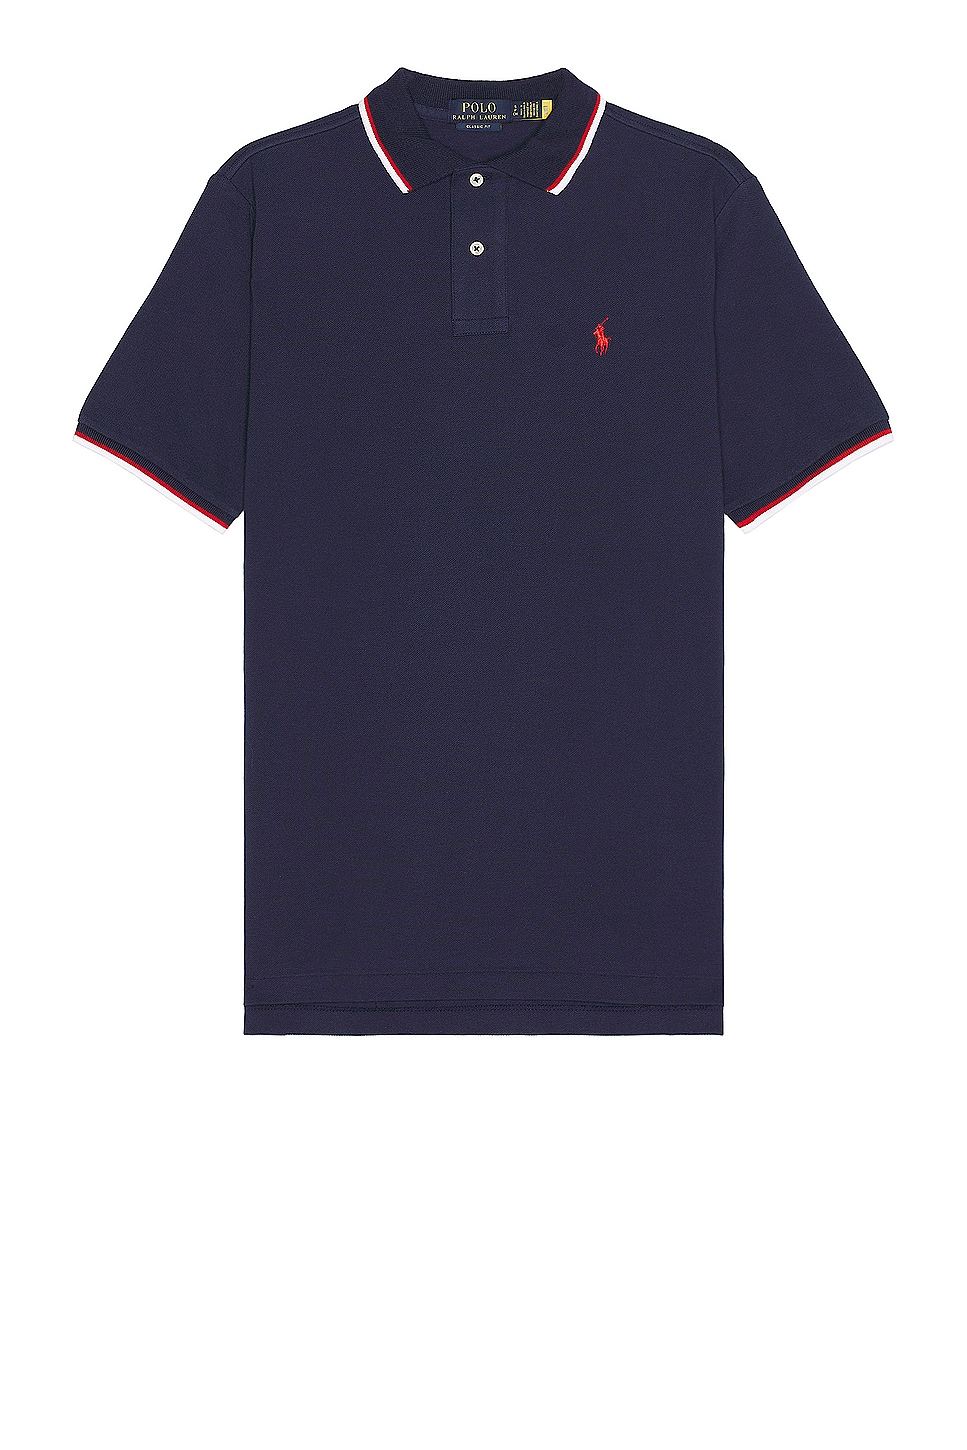 Image 1 of Polo Ralph Lauren Tipped Mesh Classic Polo in Newport Navy